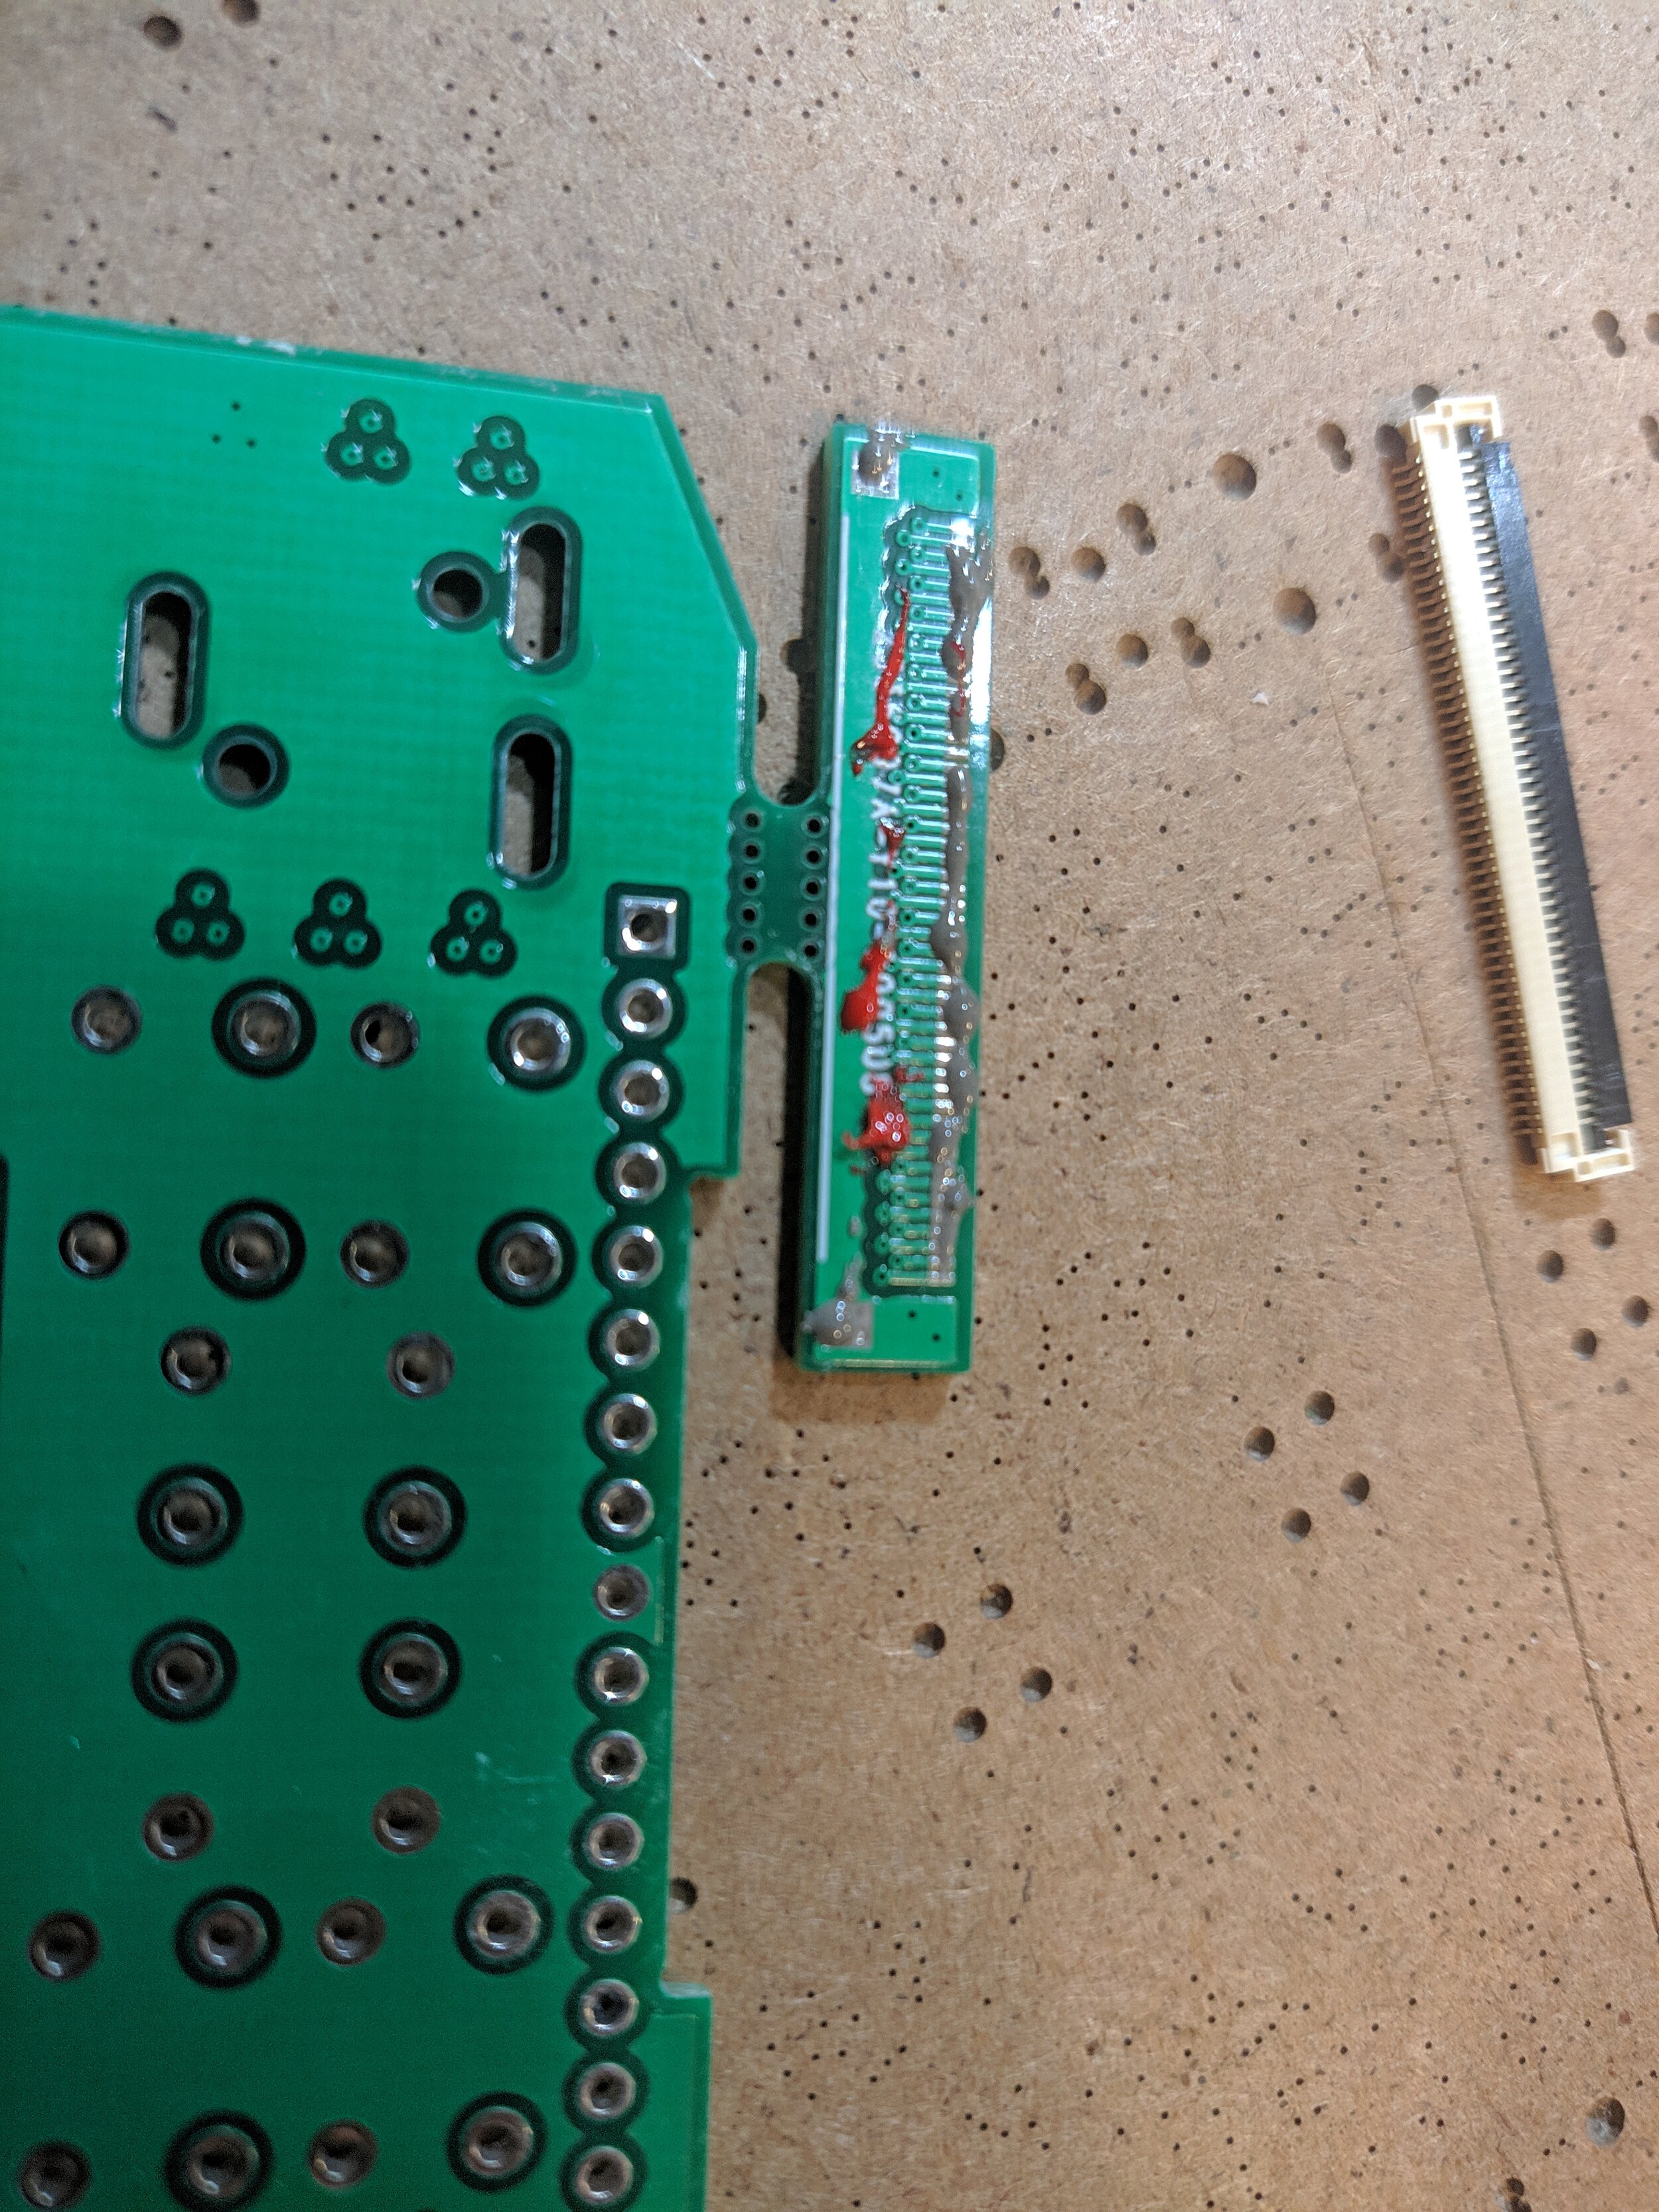 Soldering the ribbon cable connector